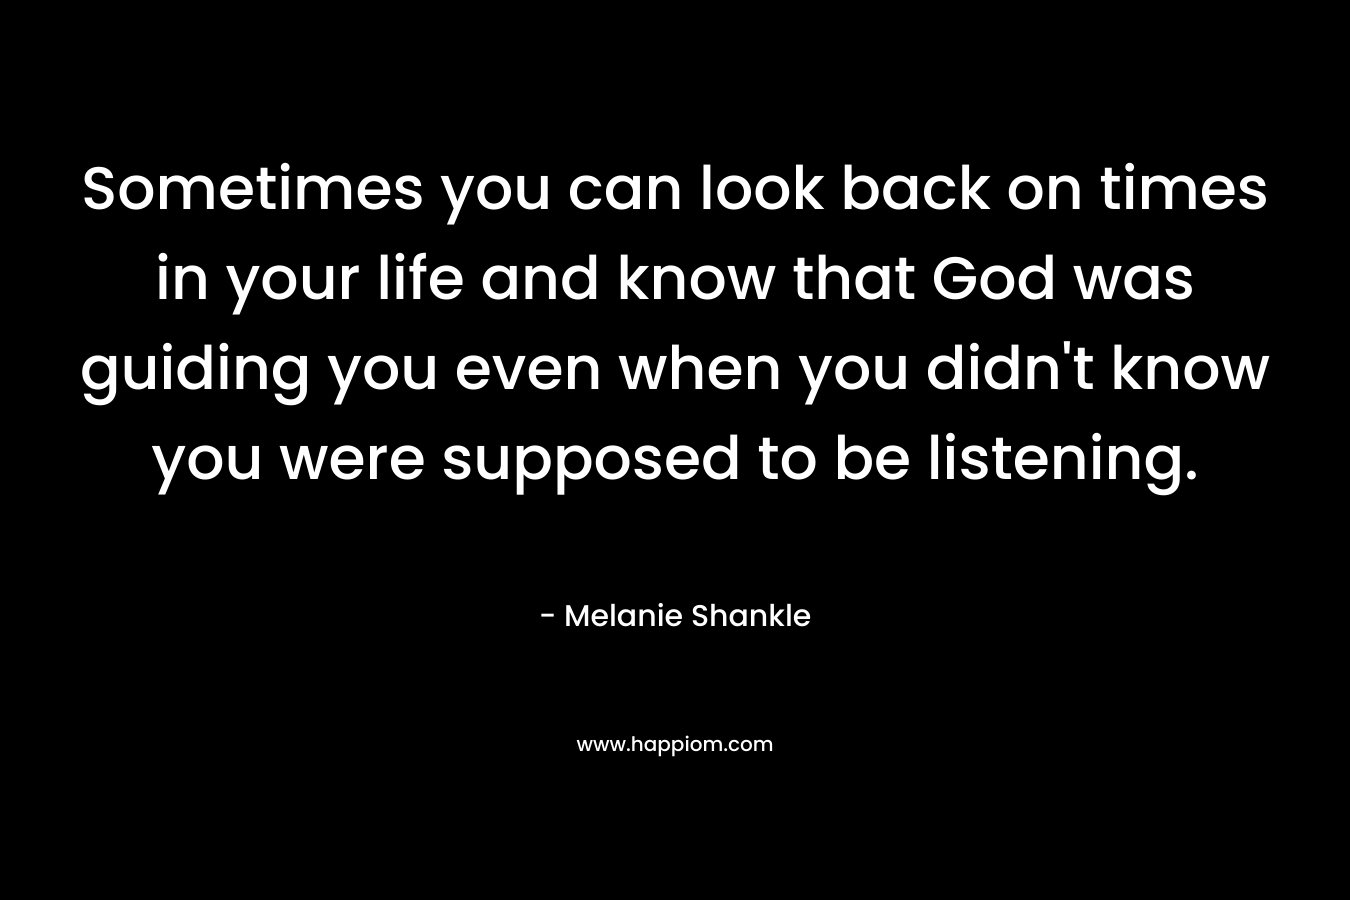 Sometimes you can look back on times in your life and know that God was guiding you even when you didn’t know you were supposed to be listening. – Melanie Shankle